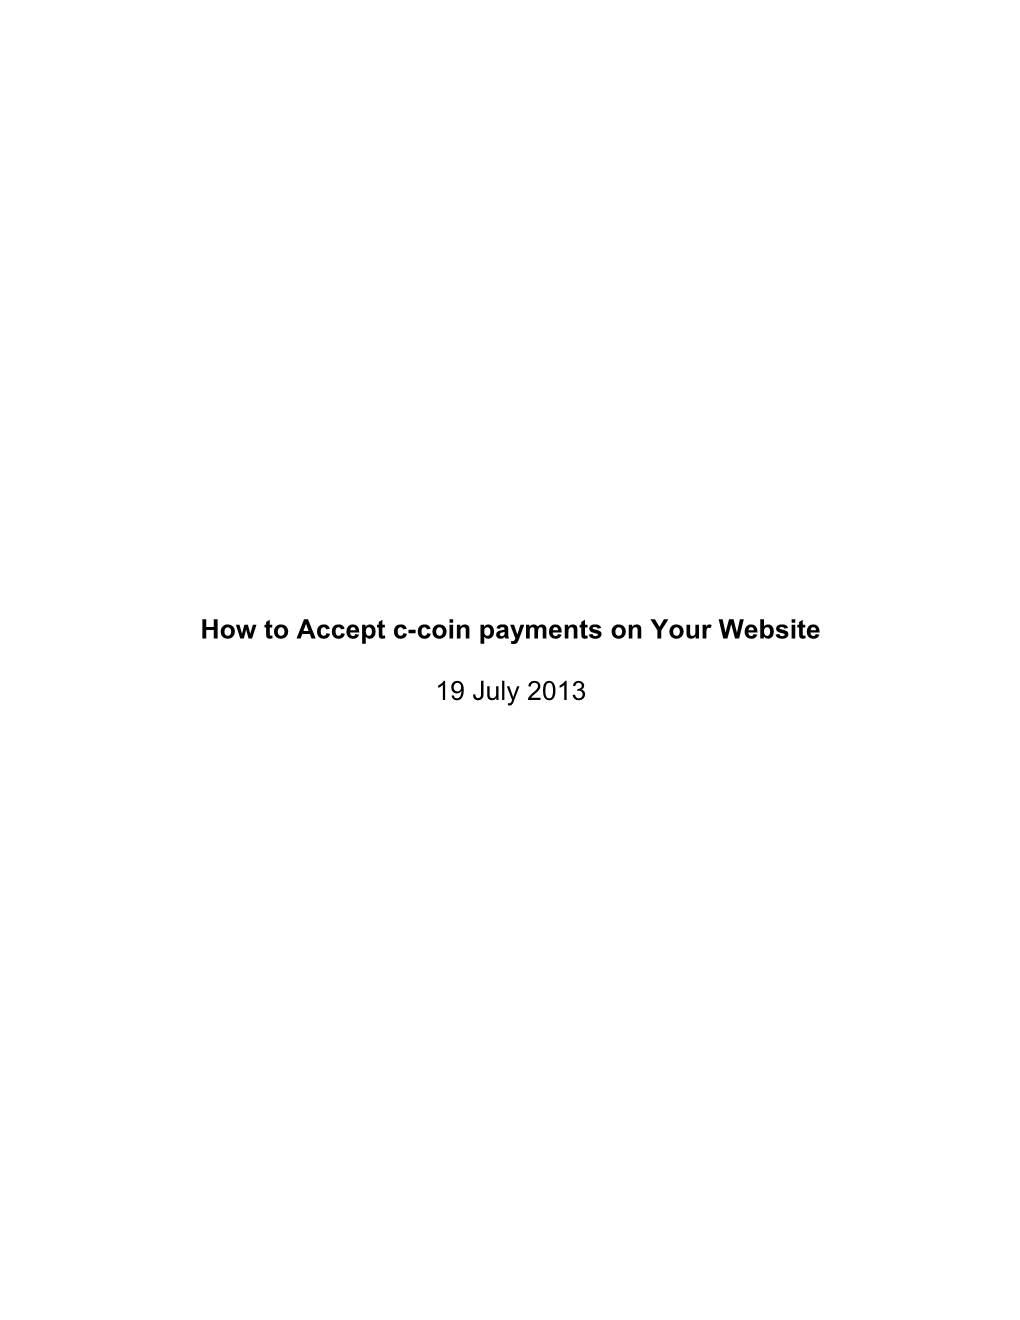 How to Accept C-Coin Payments on Your Website